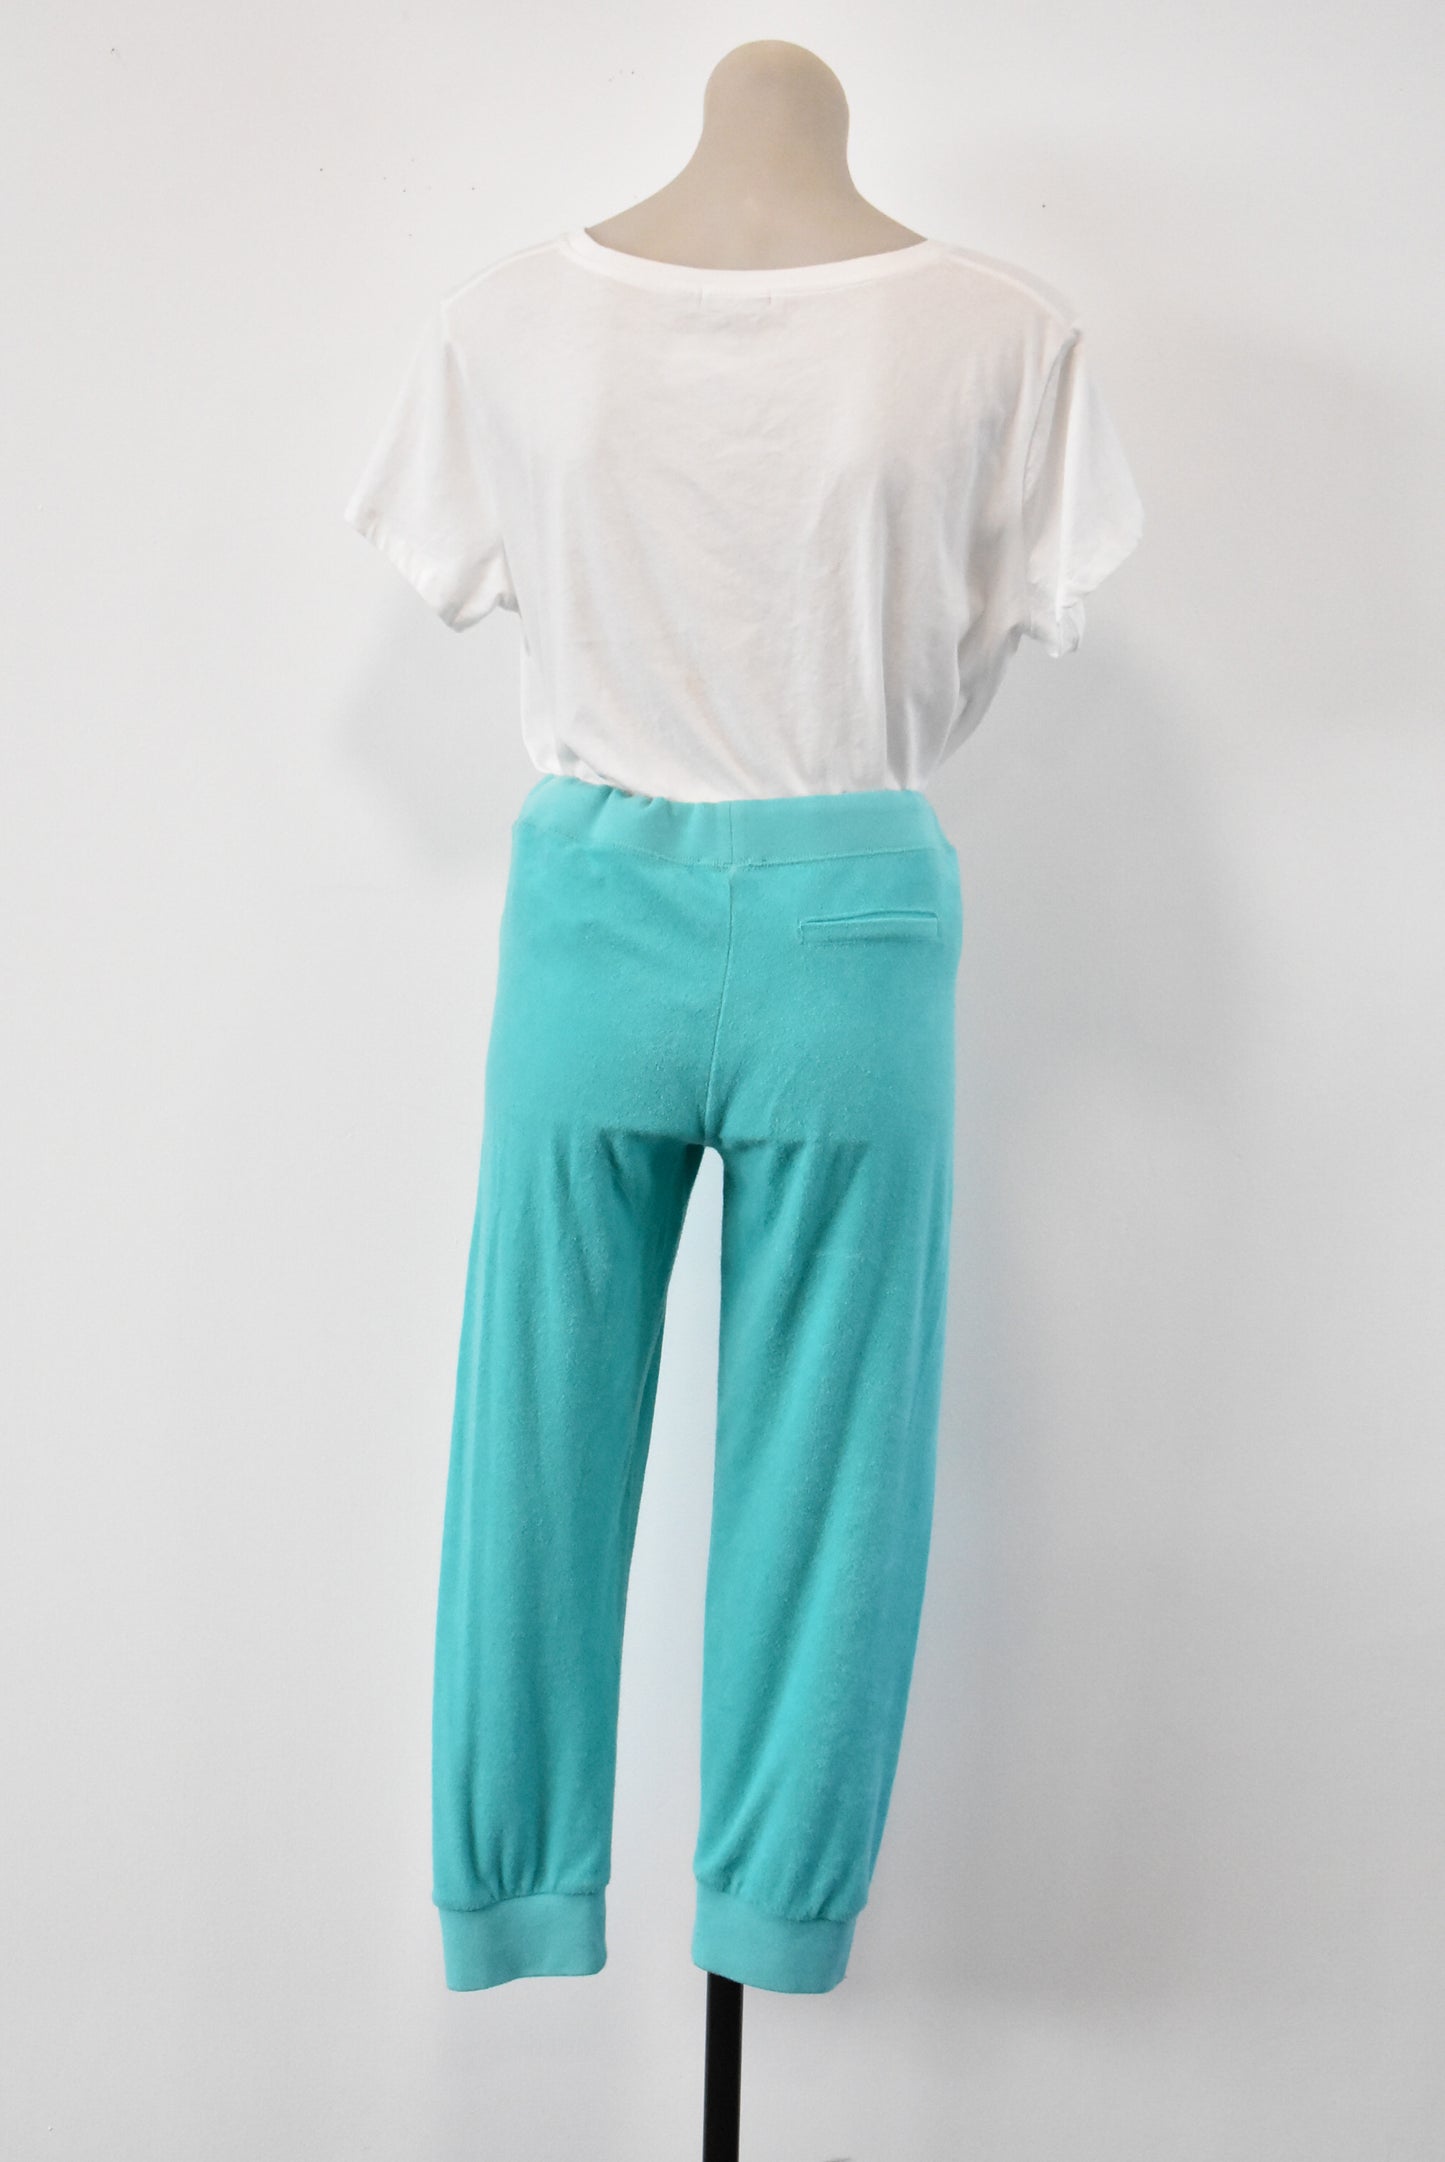 Juicy Couture turquoise tracksuit pants, M